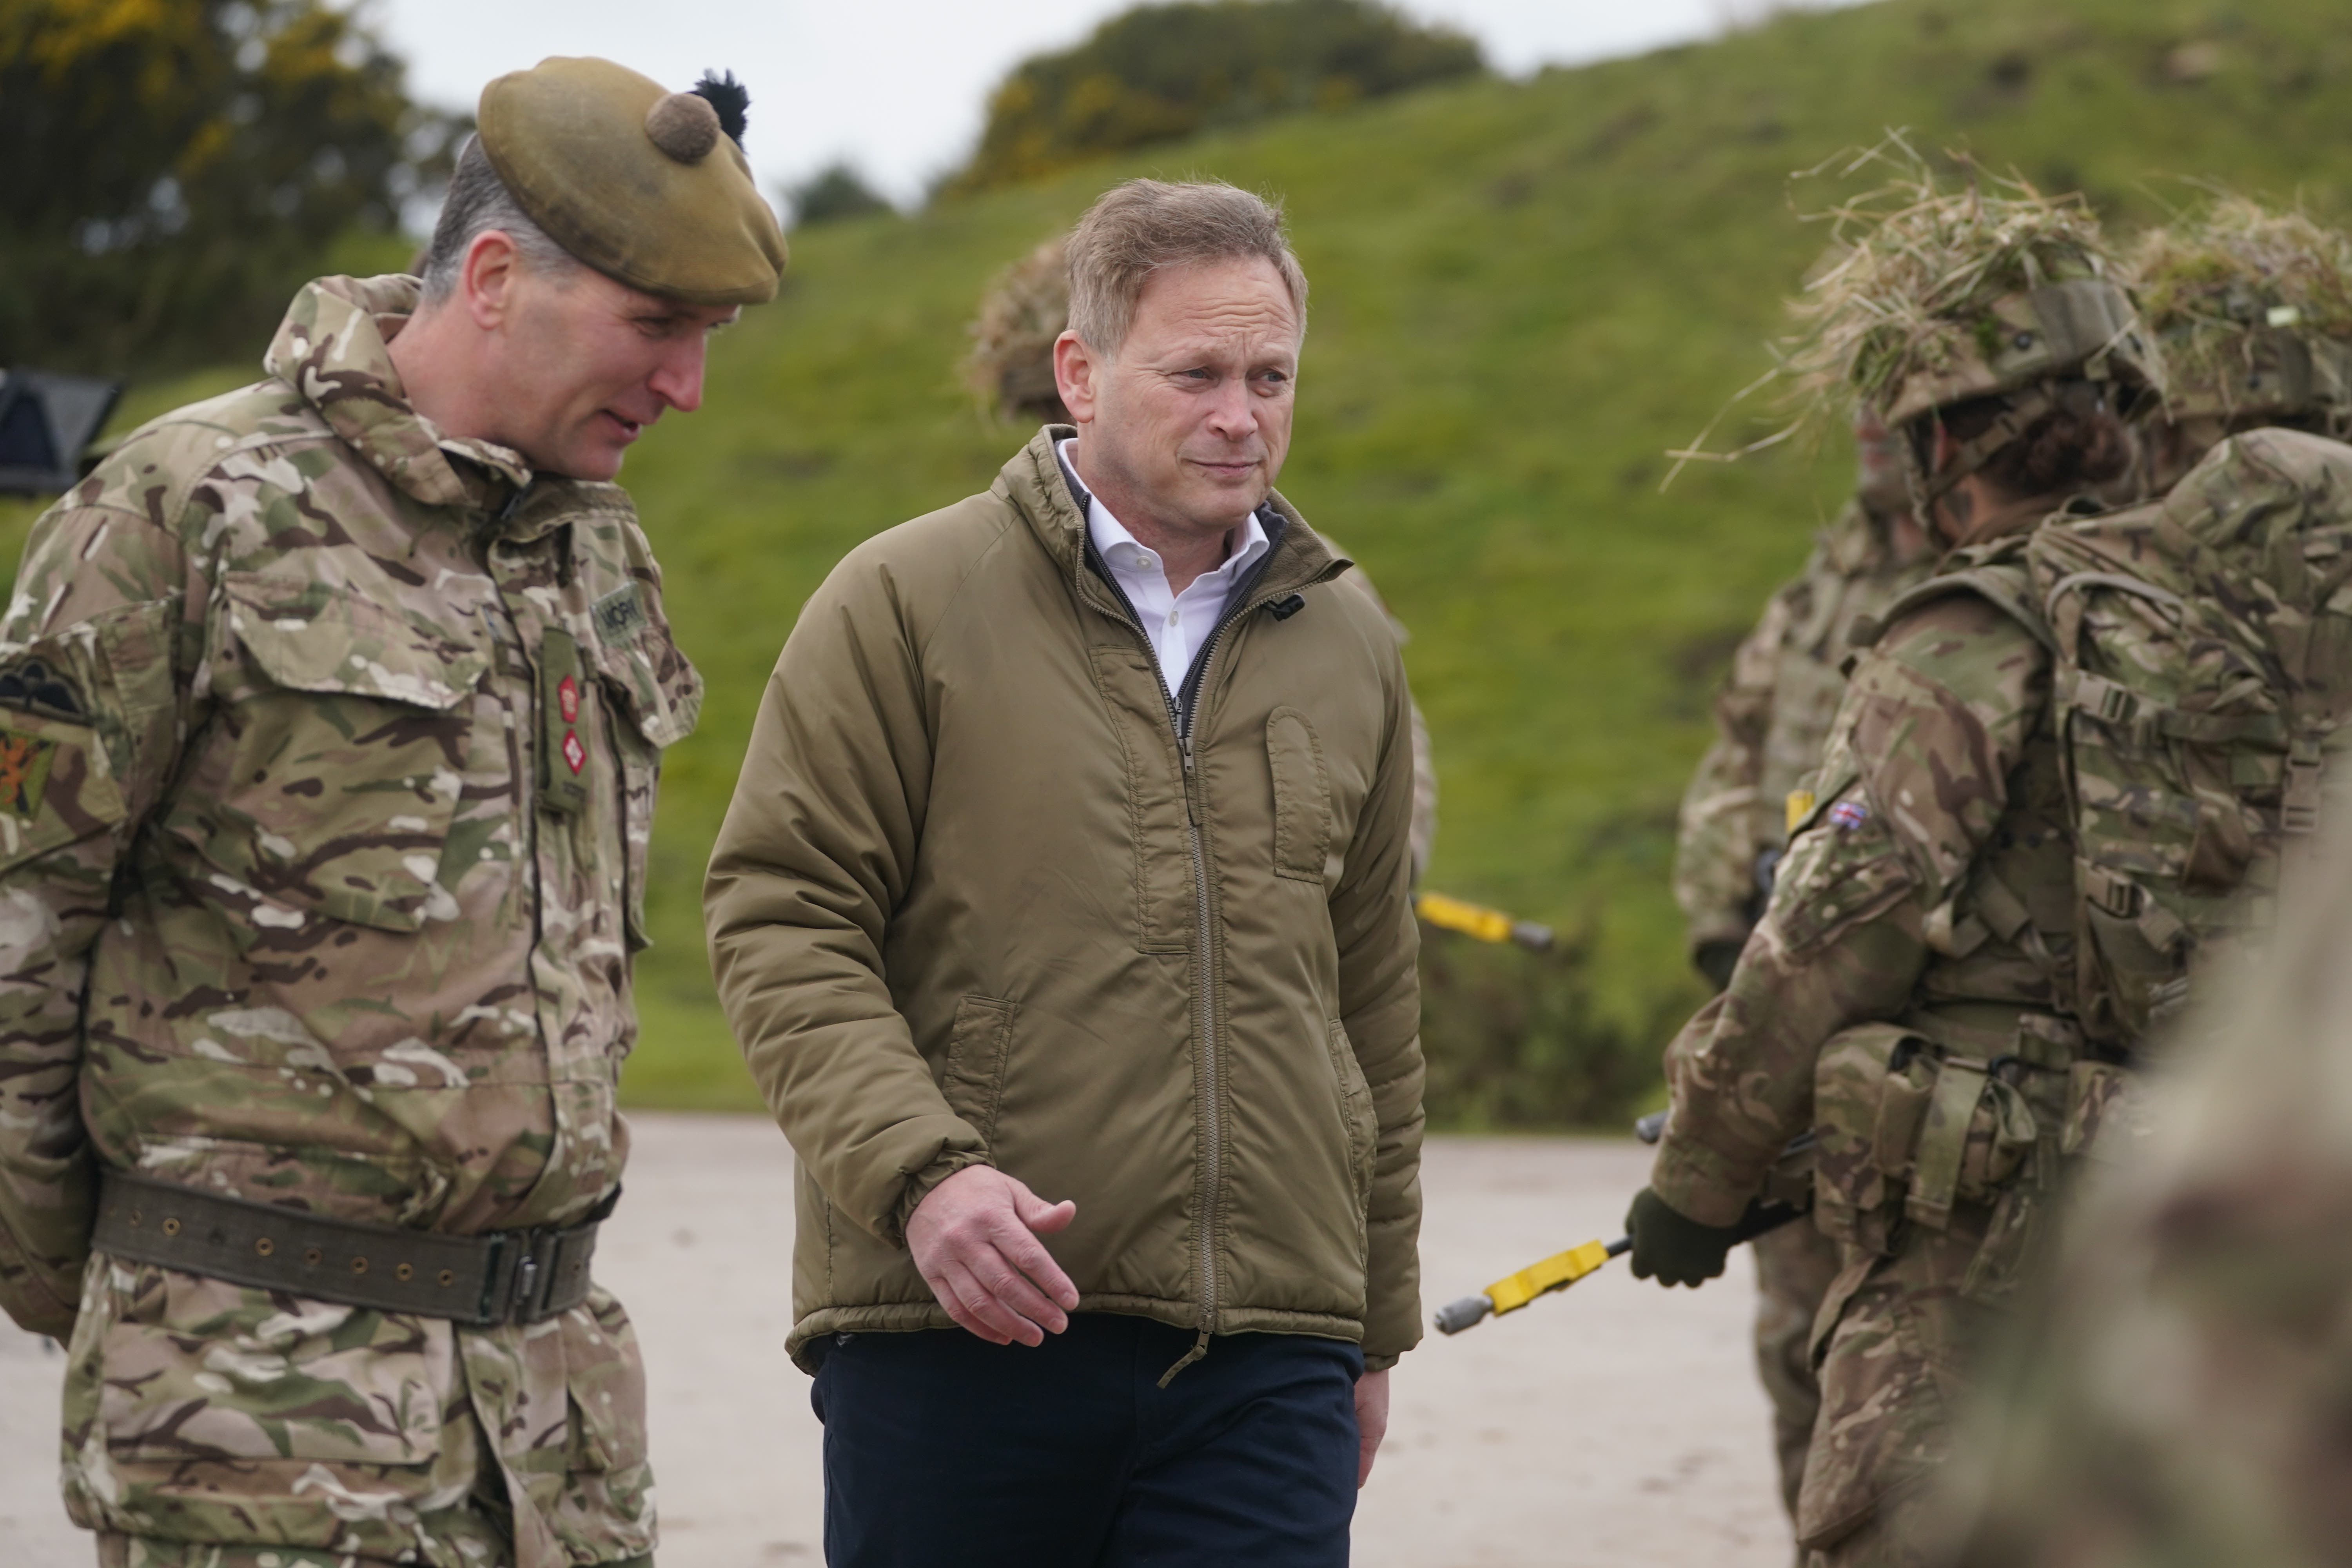 Grant Shapps visited Ukraine earlier this month